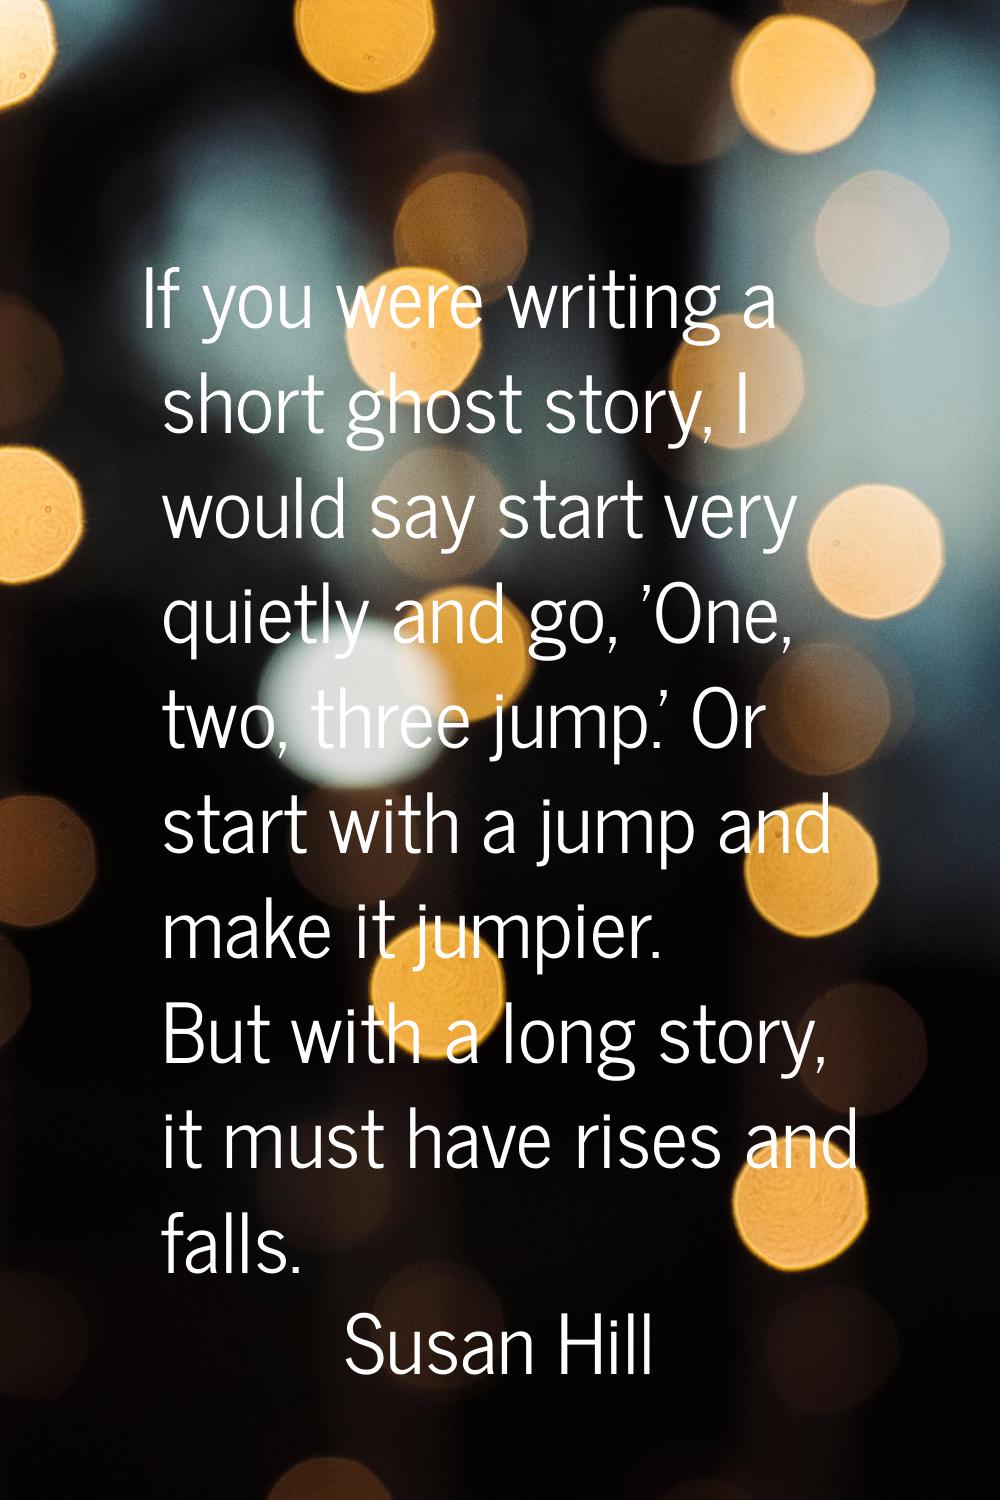 If you were writing a short ghost story, I would say start very quietly and go, 'One, two, three ju